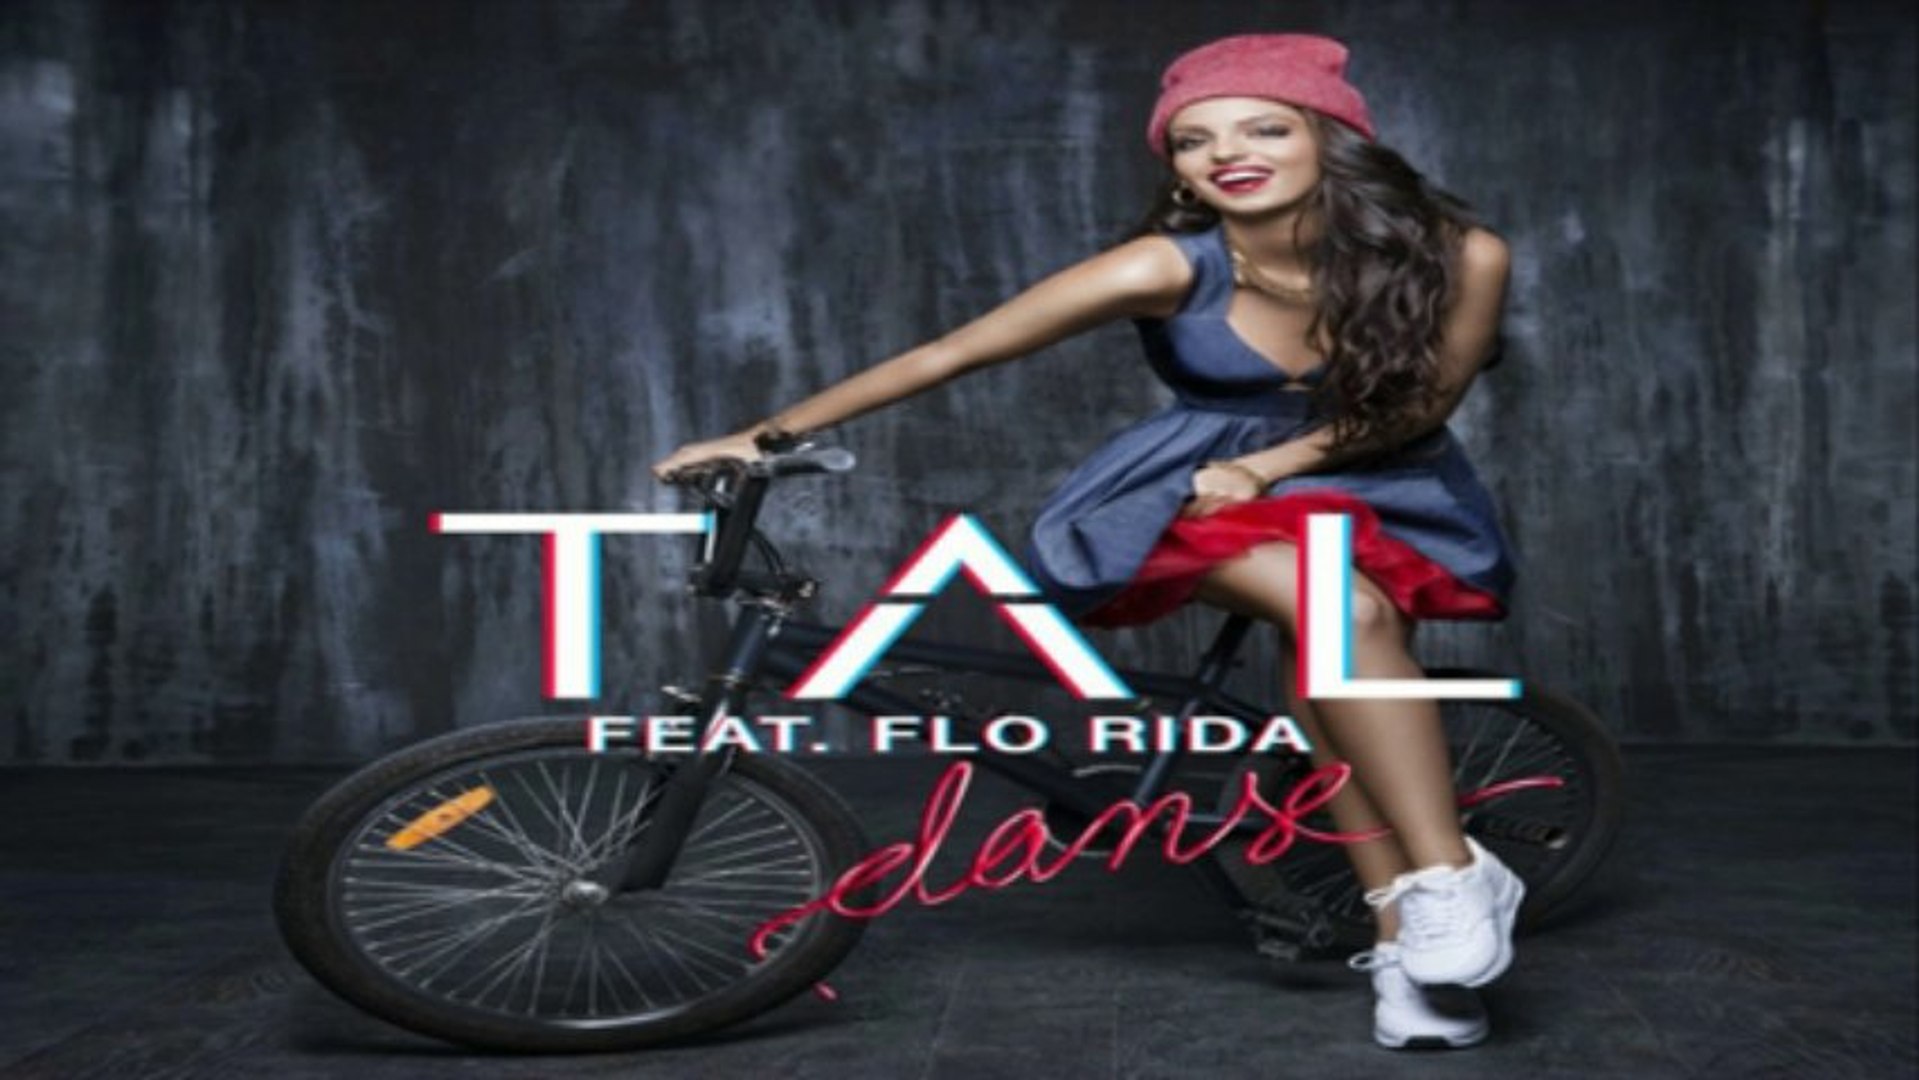 [ DOWNLOAD MP3 ] Tal - Danse (feat. Flo Rida) [ iTunesRip ] - video  Dailymotion